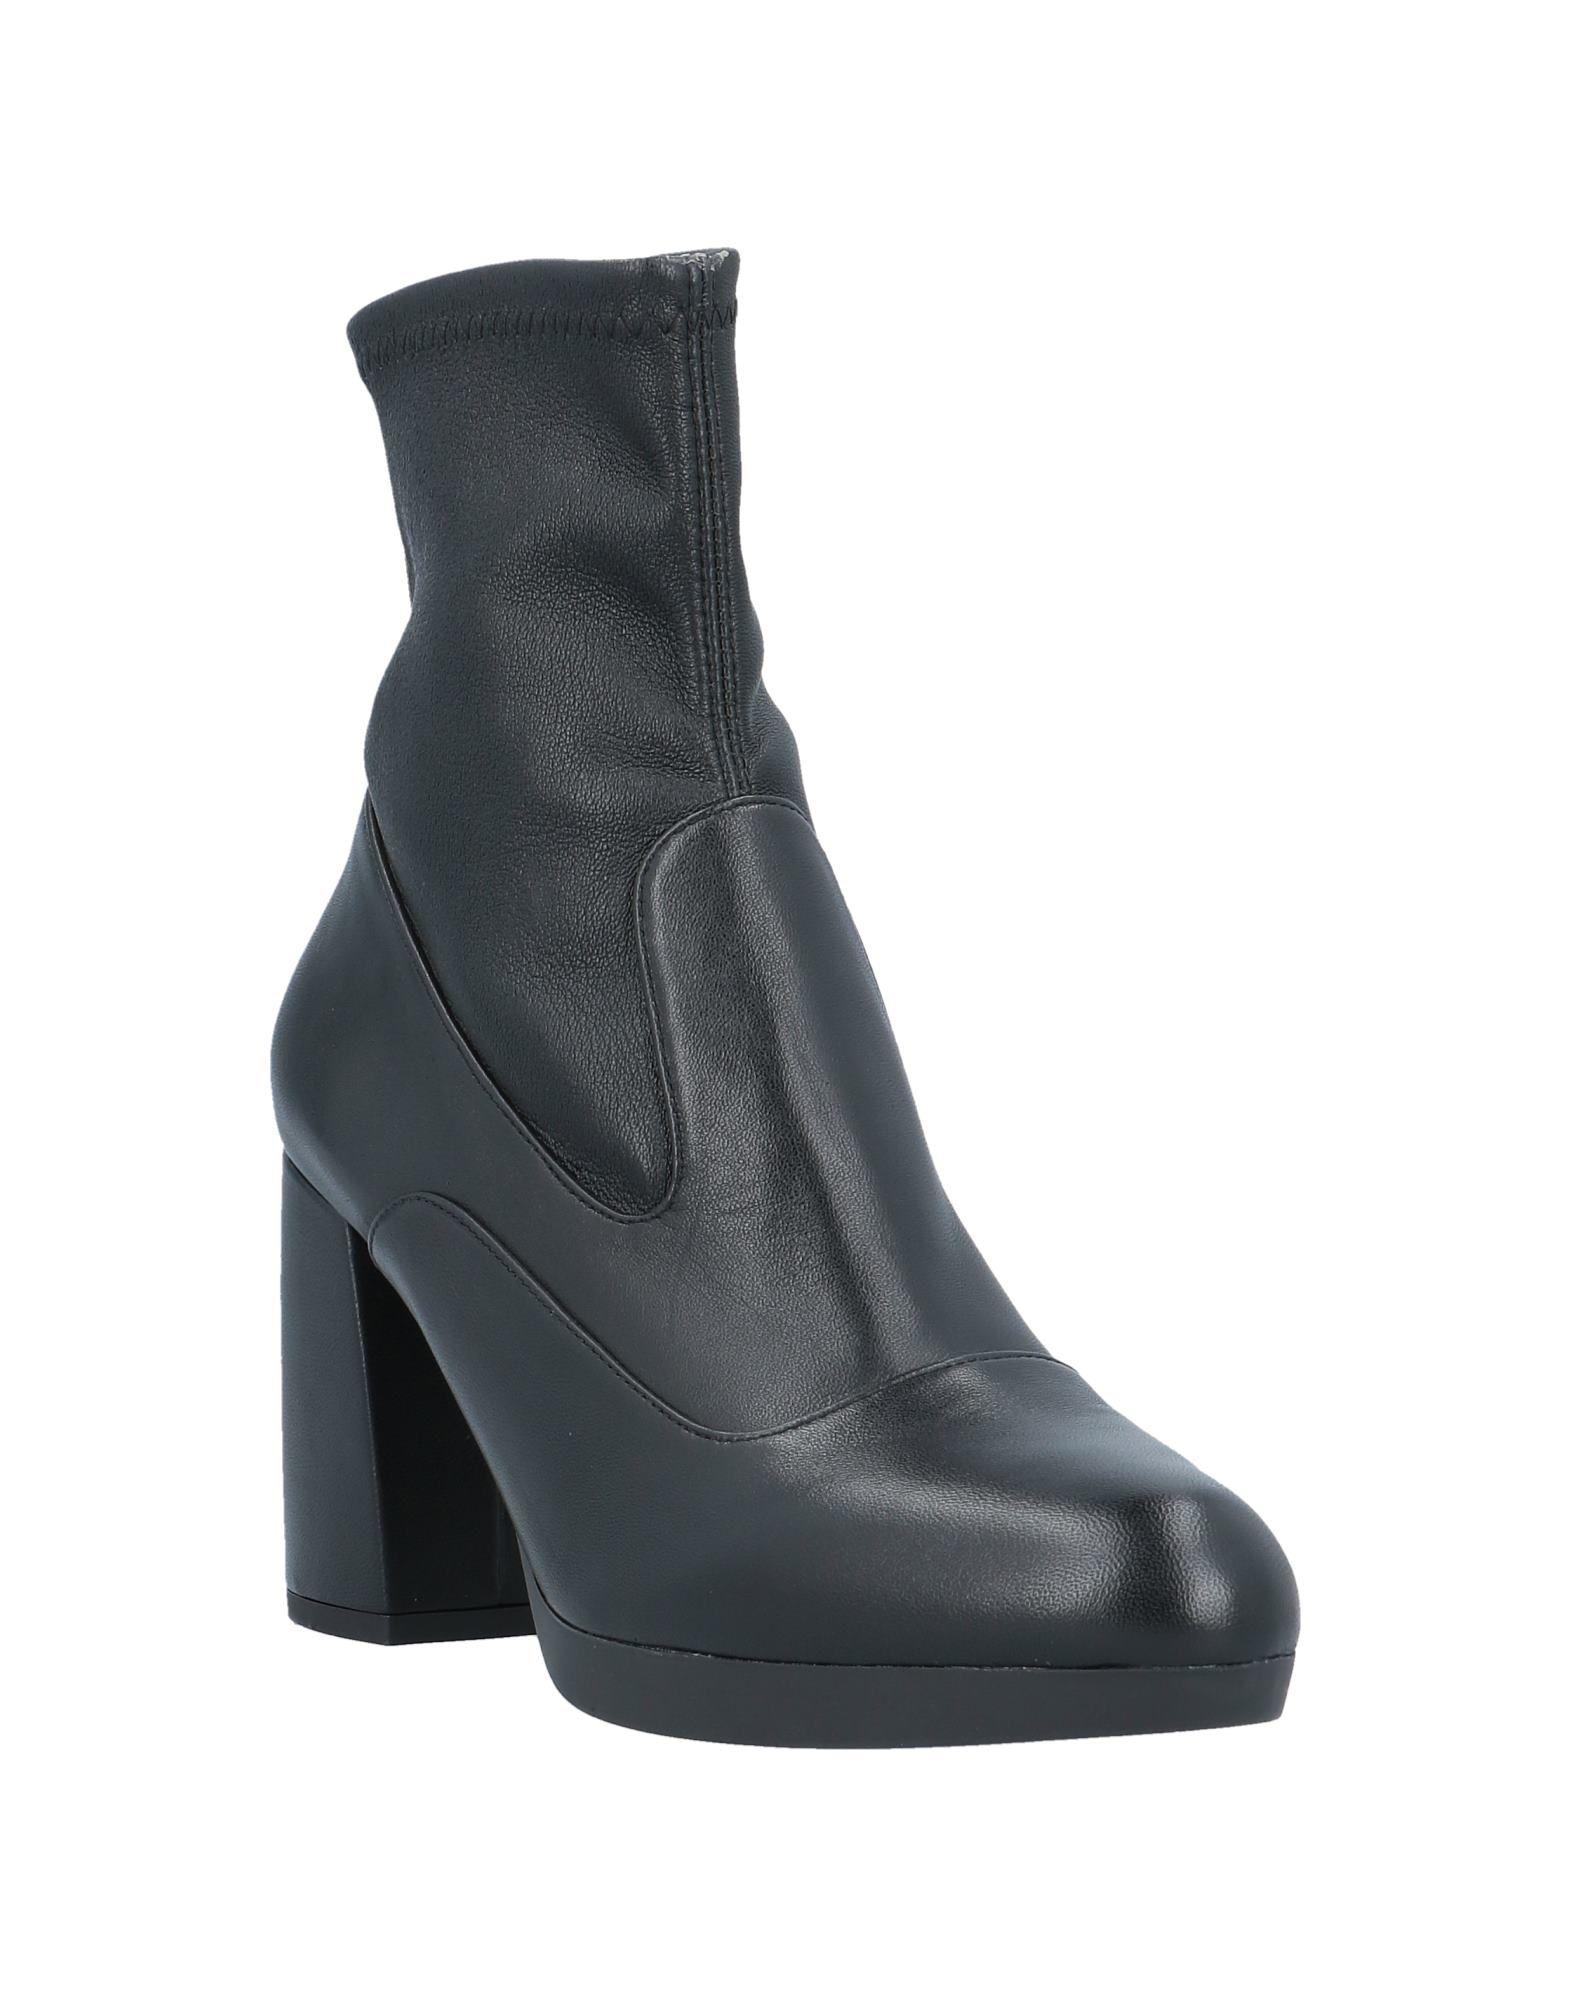 Chie Mihara Ankle Boots in Black - Lyst